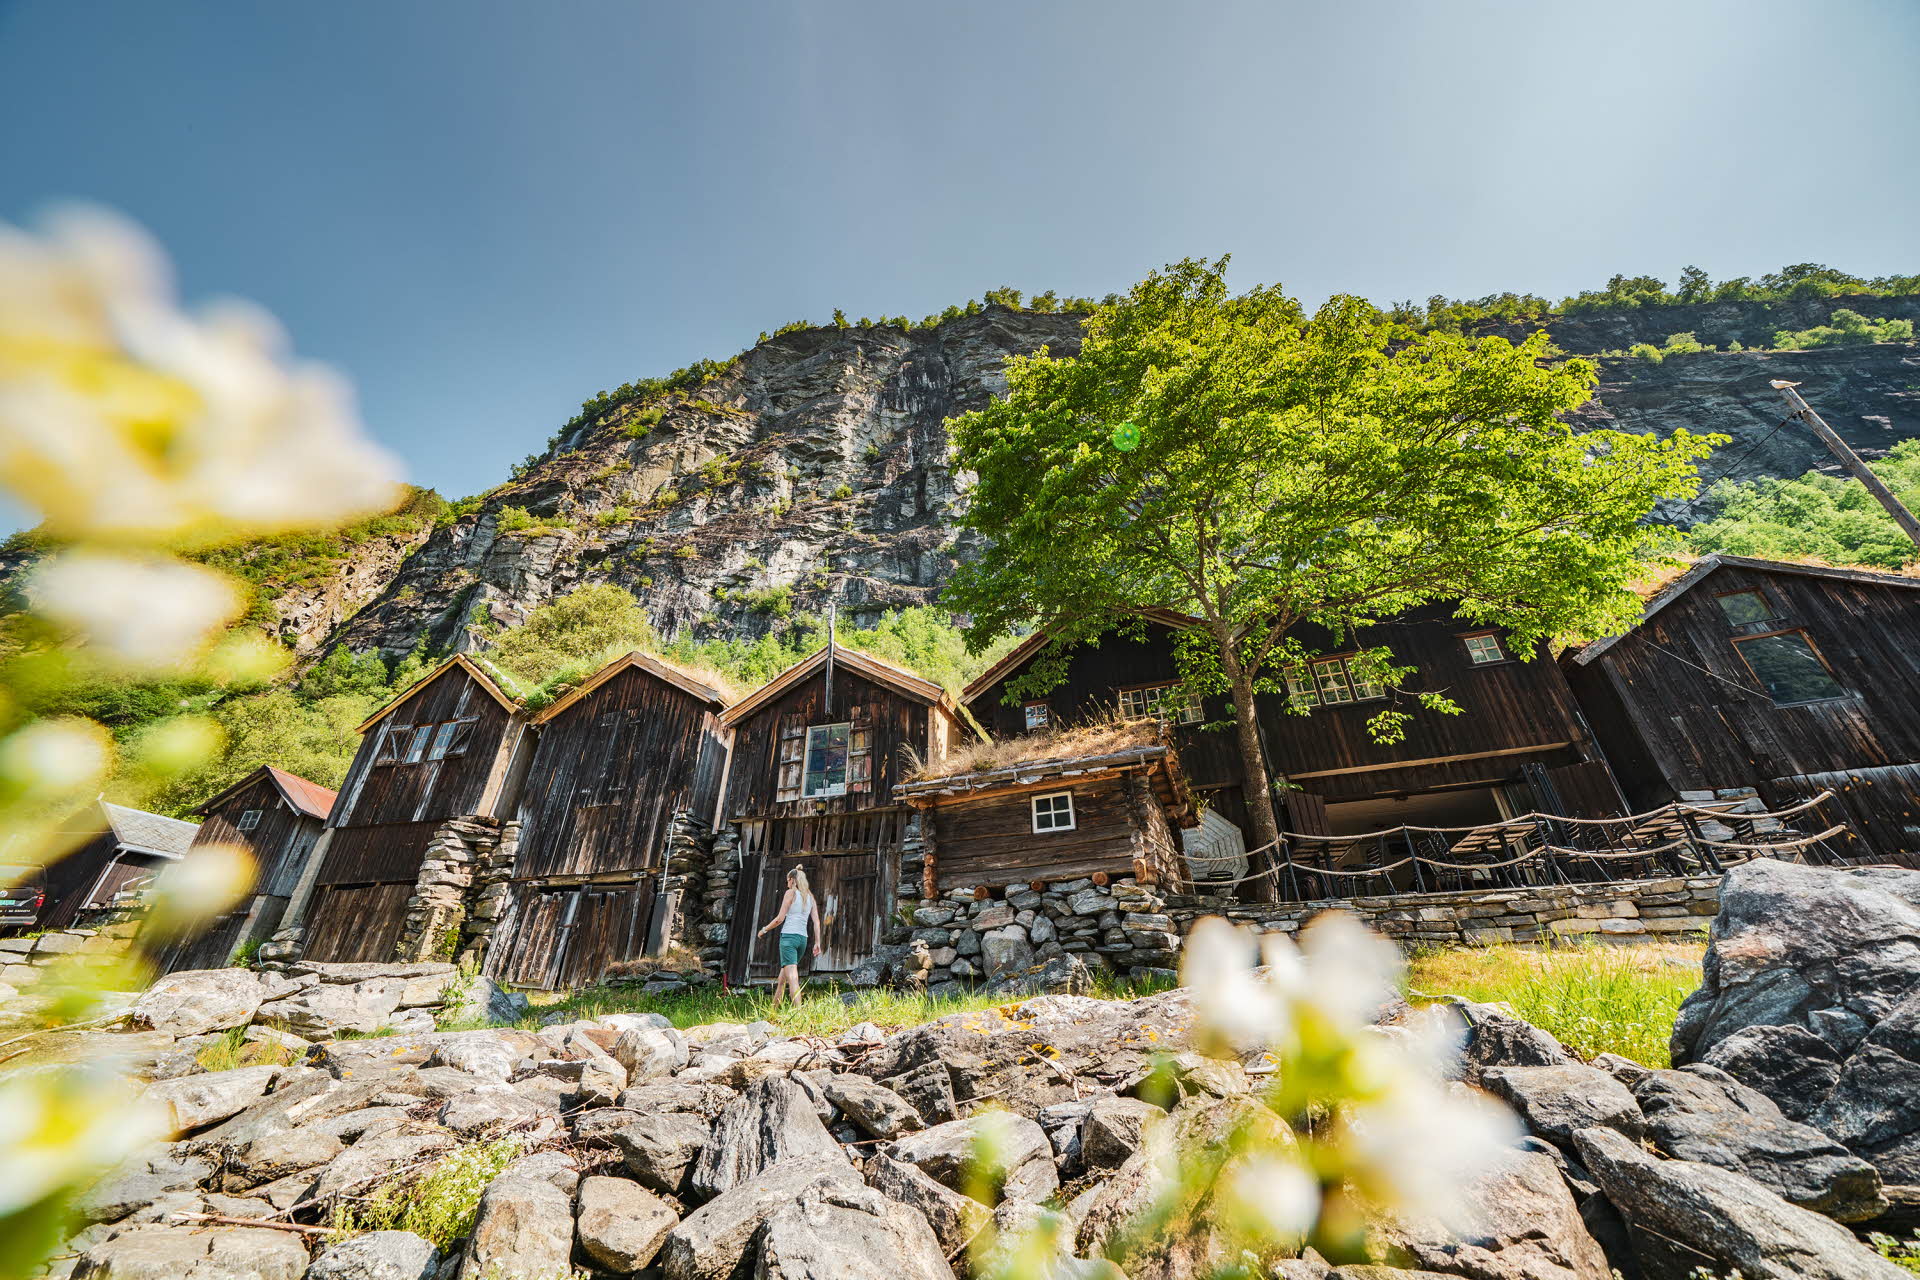 A woman walking next to old wooden houses in Geiranger